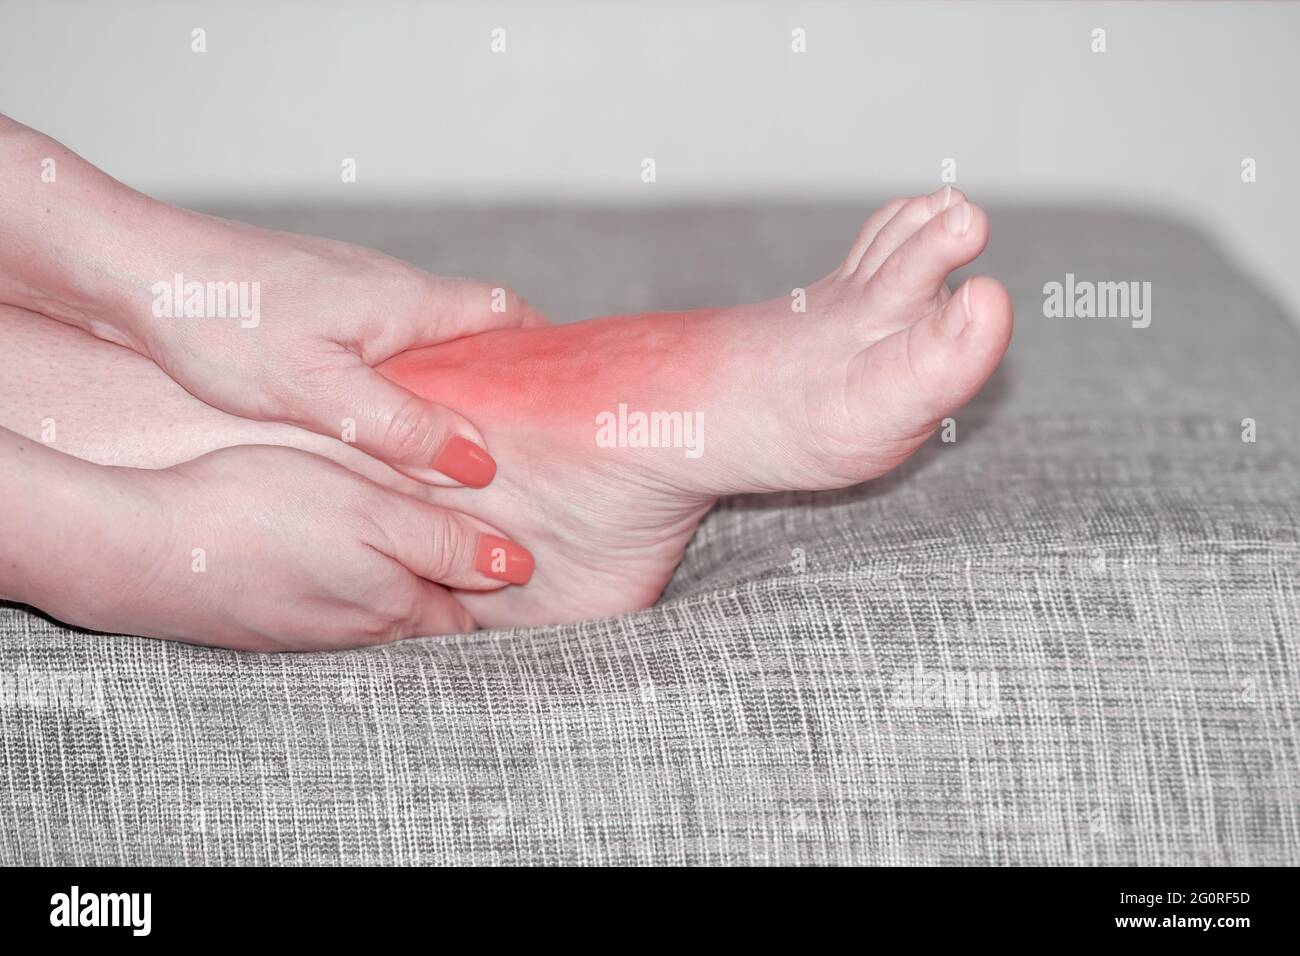 Sprain, dislocation of the foot. Leg joint injury, red inflamed spot. Medical treatment. Sports injury Stock Photo